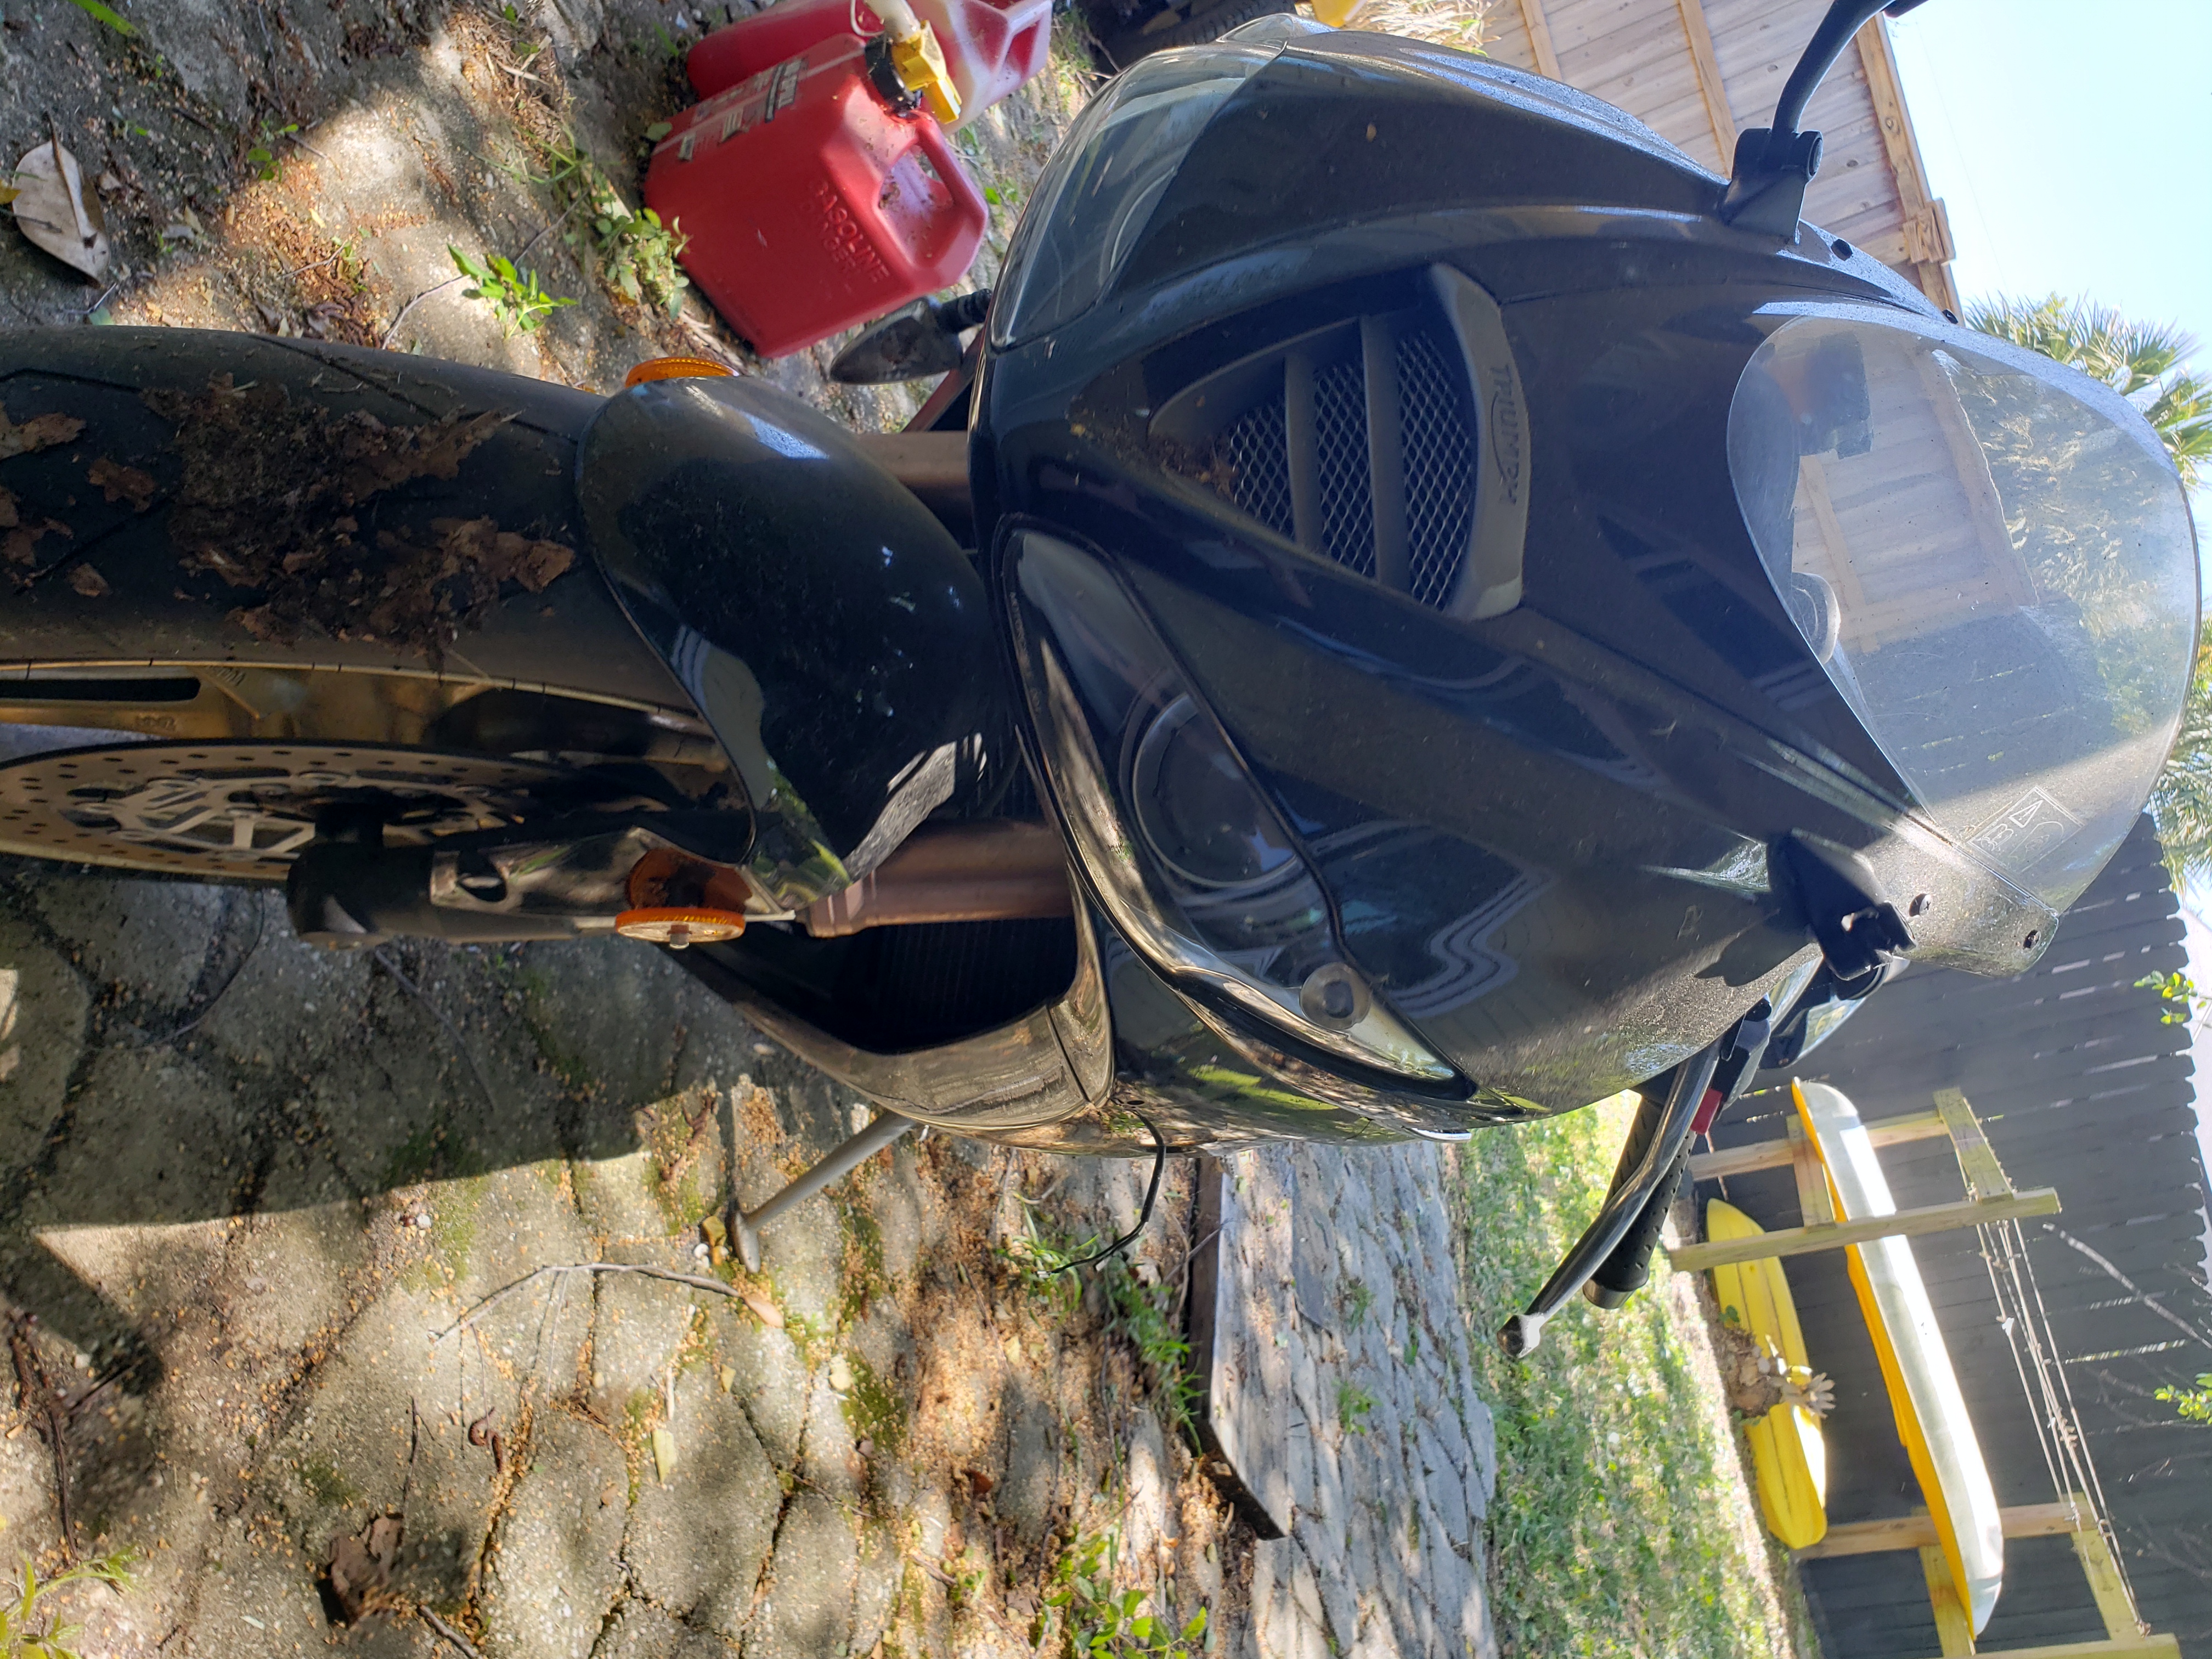 After first return, bike still filthy not repaired